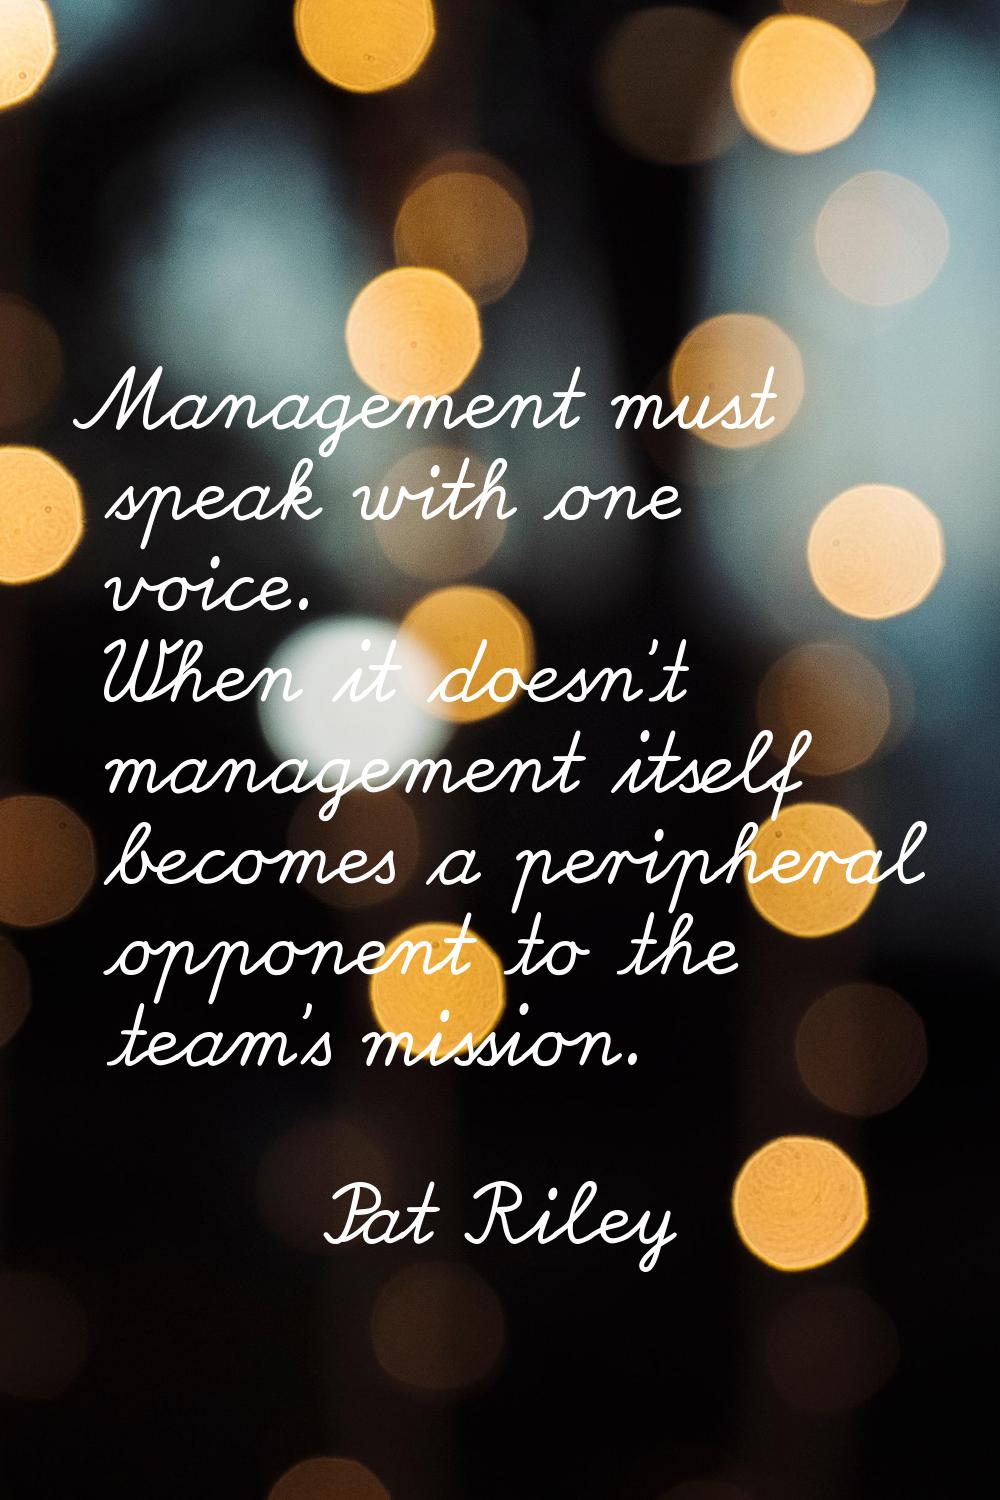 Management must speak with one voice. When it doesn't management itself becomes a peripheral oppone